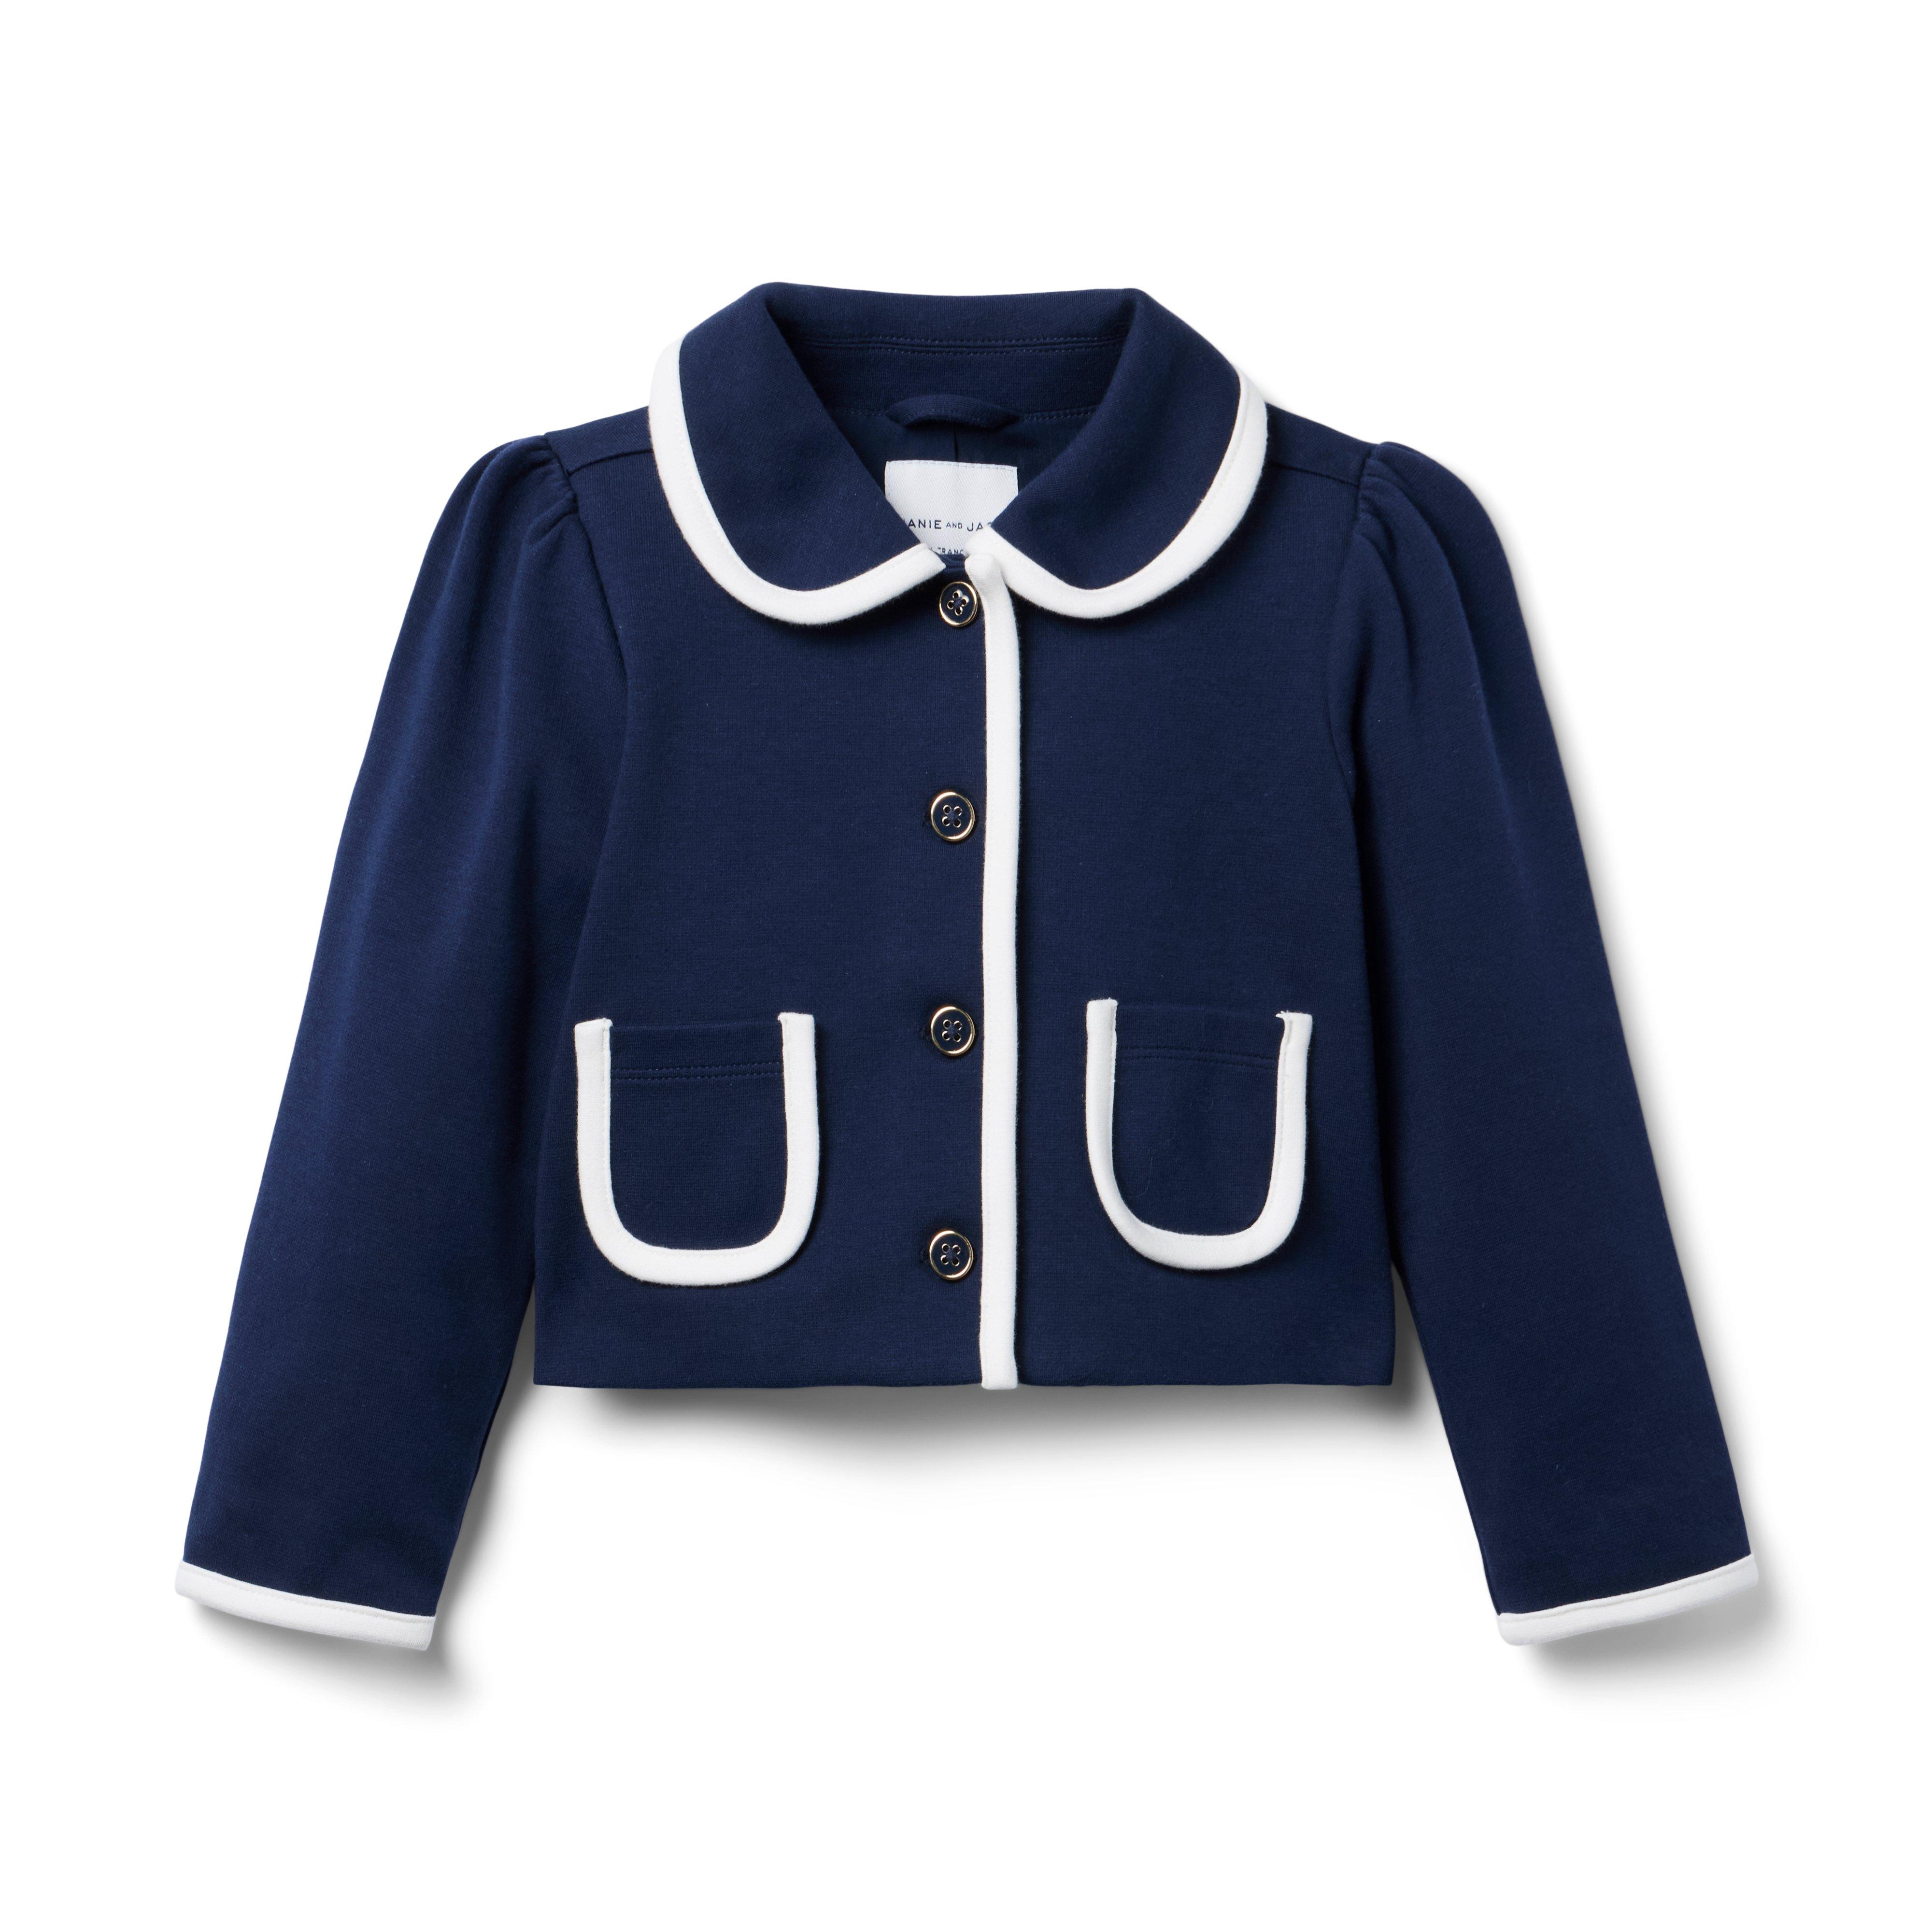 The Collared Ponte Jacket